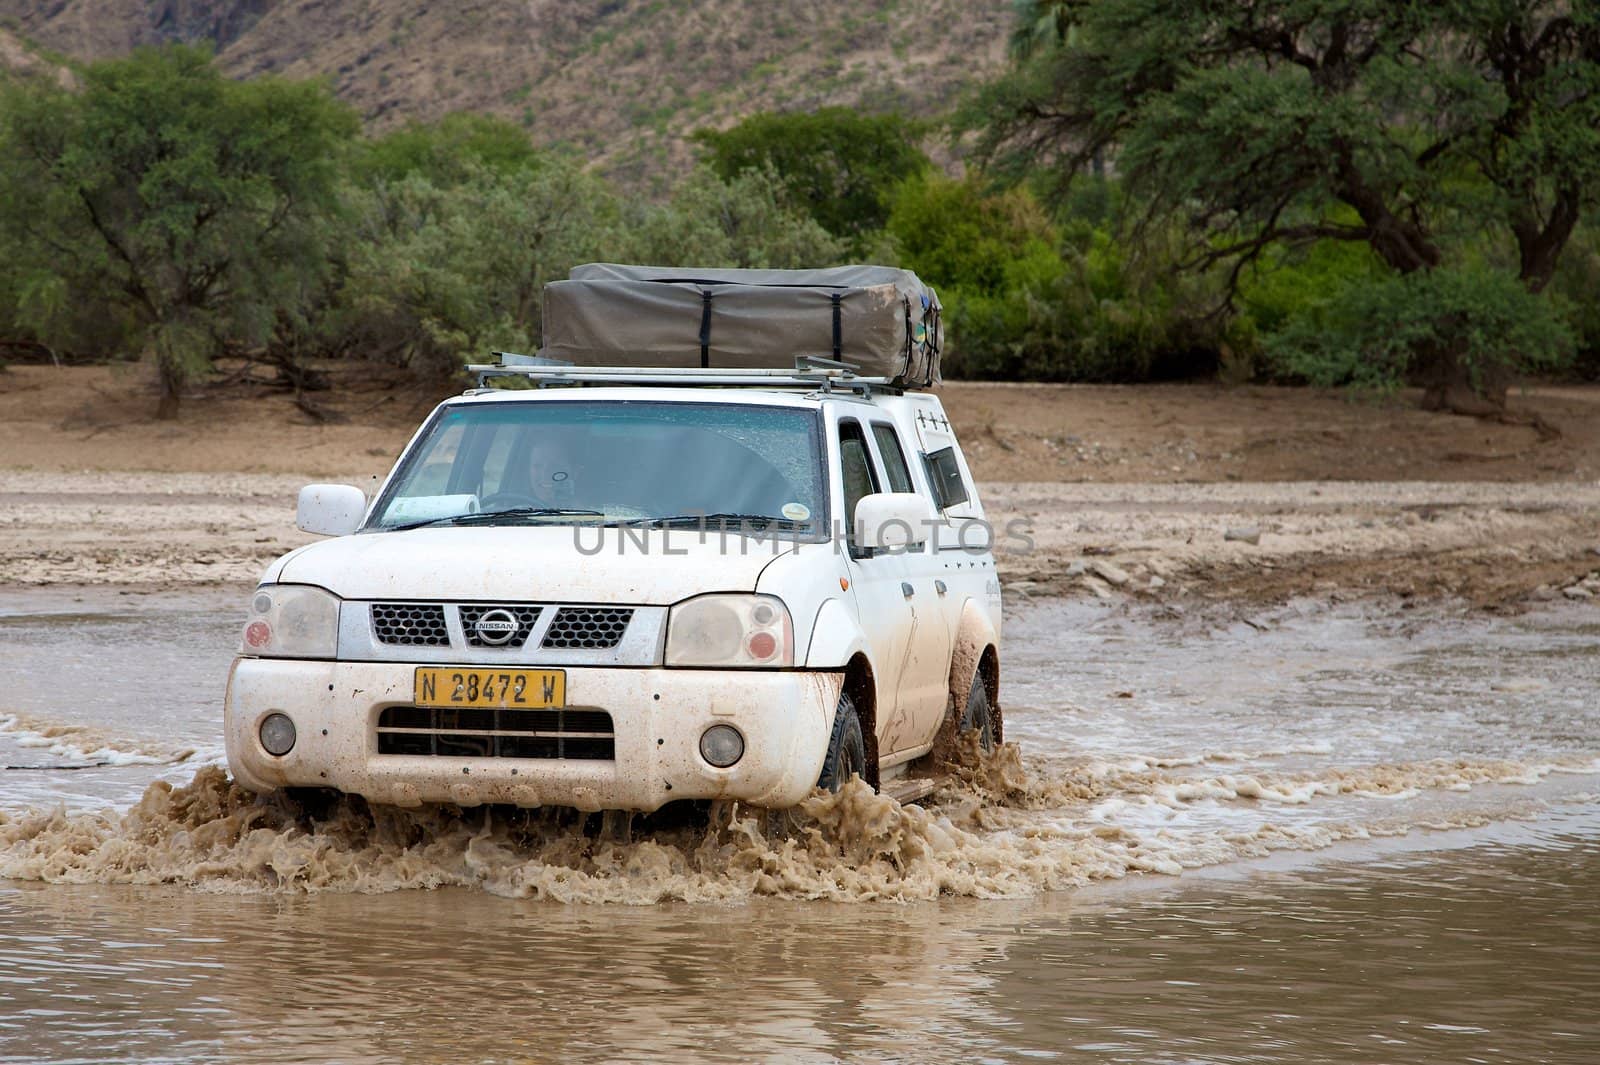 Crossing of a river by 4x4 in Namibia - Kaokoland